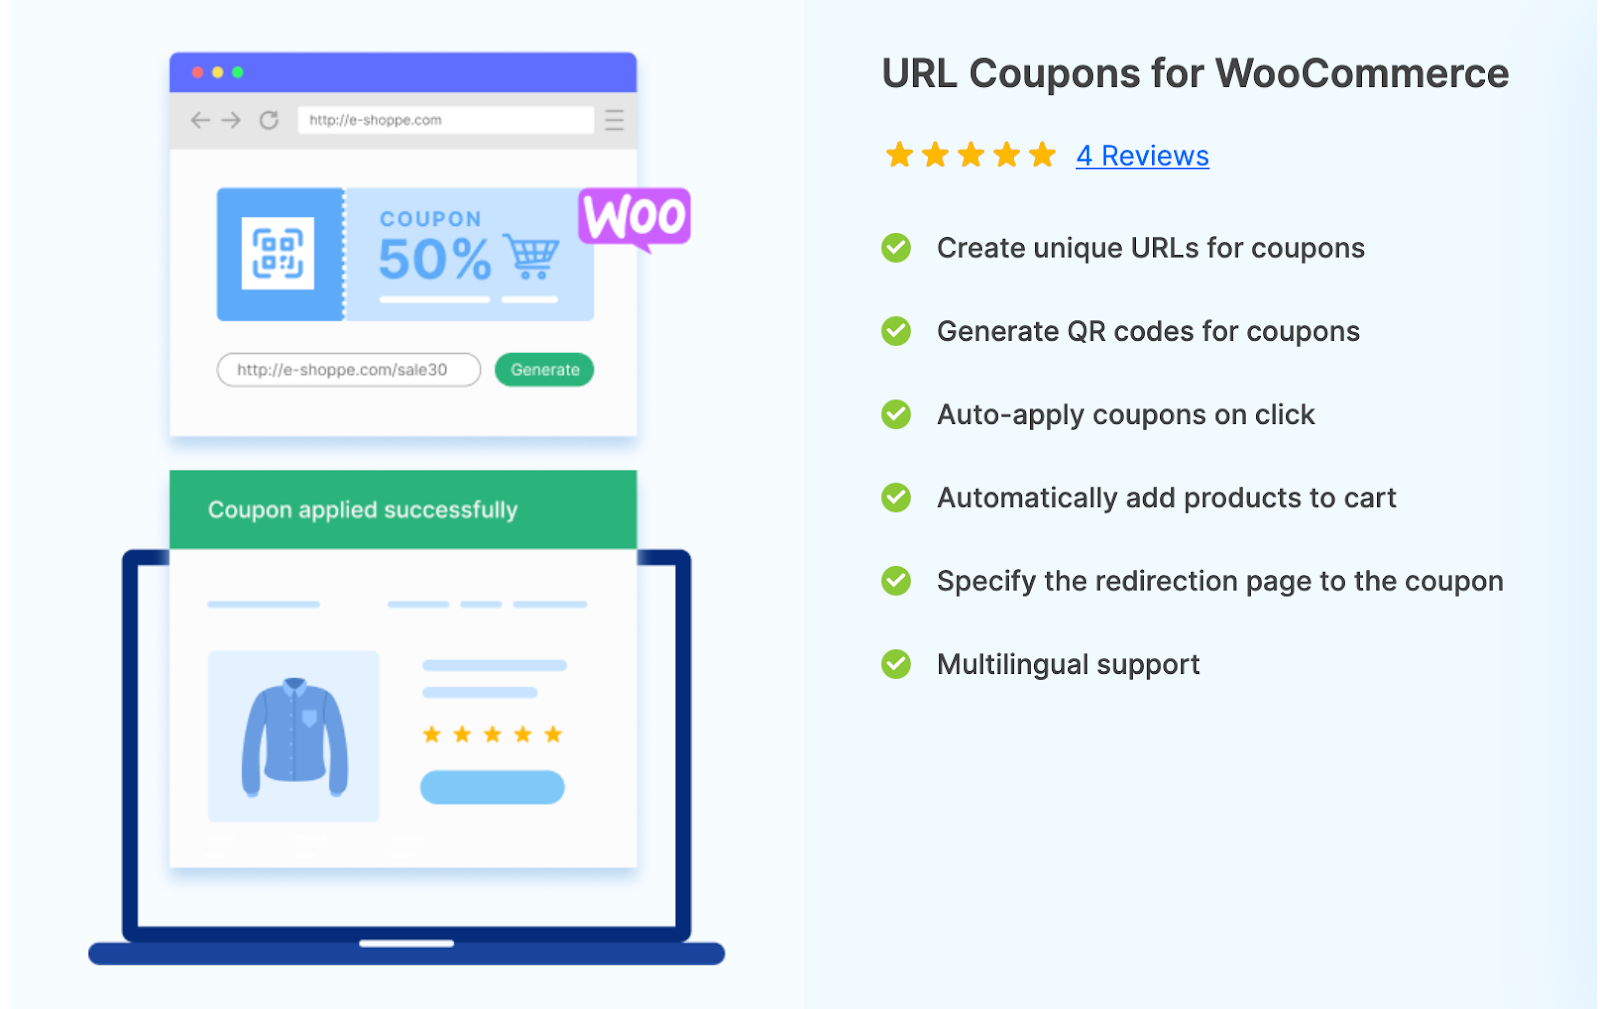 9. URL Coupons for WooCommerce